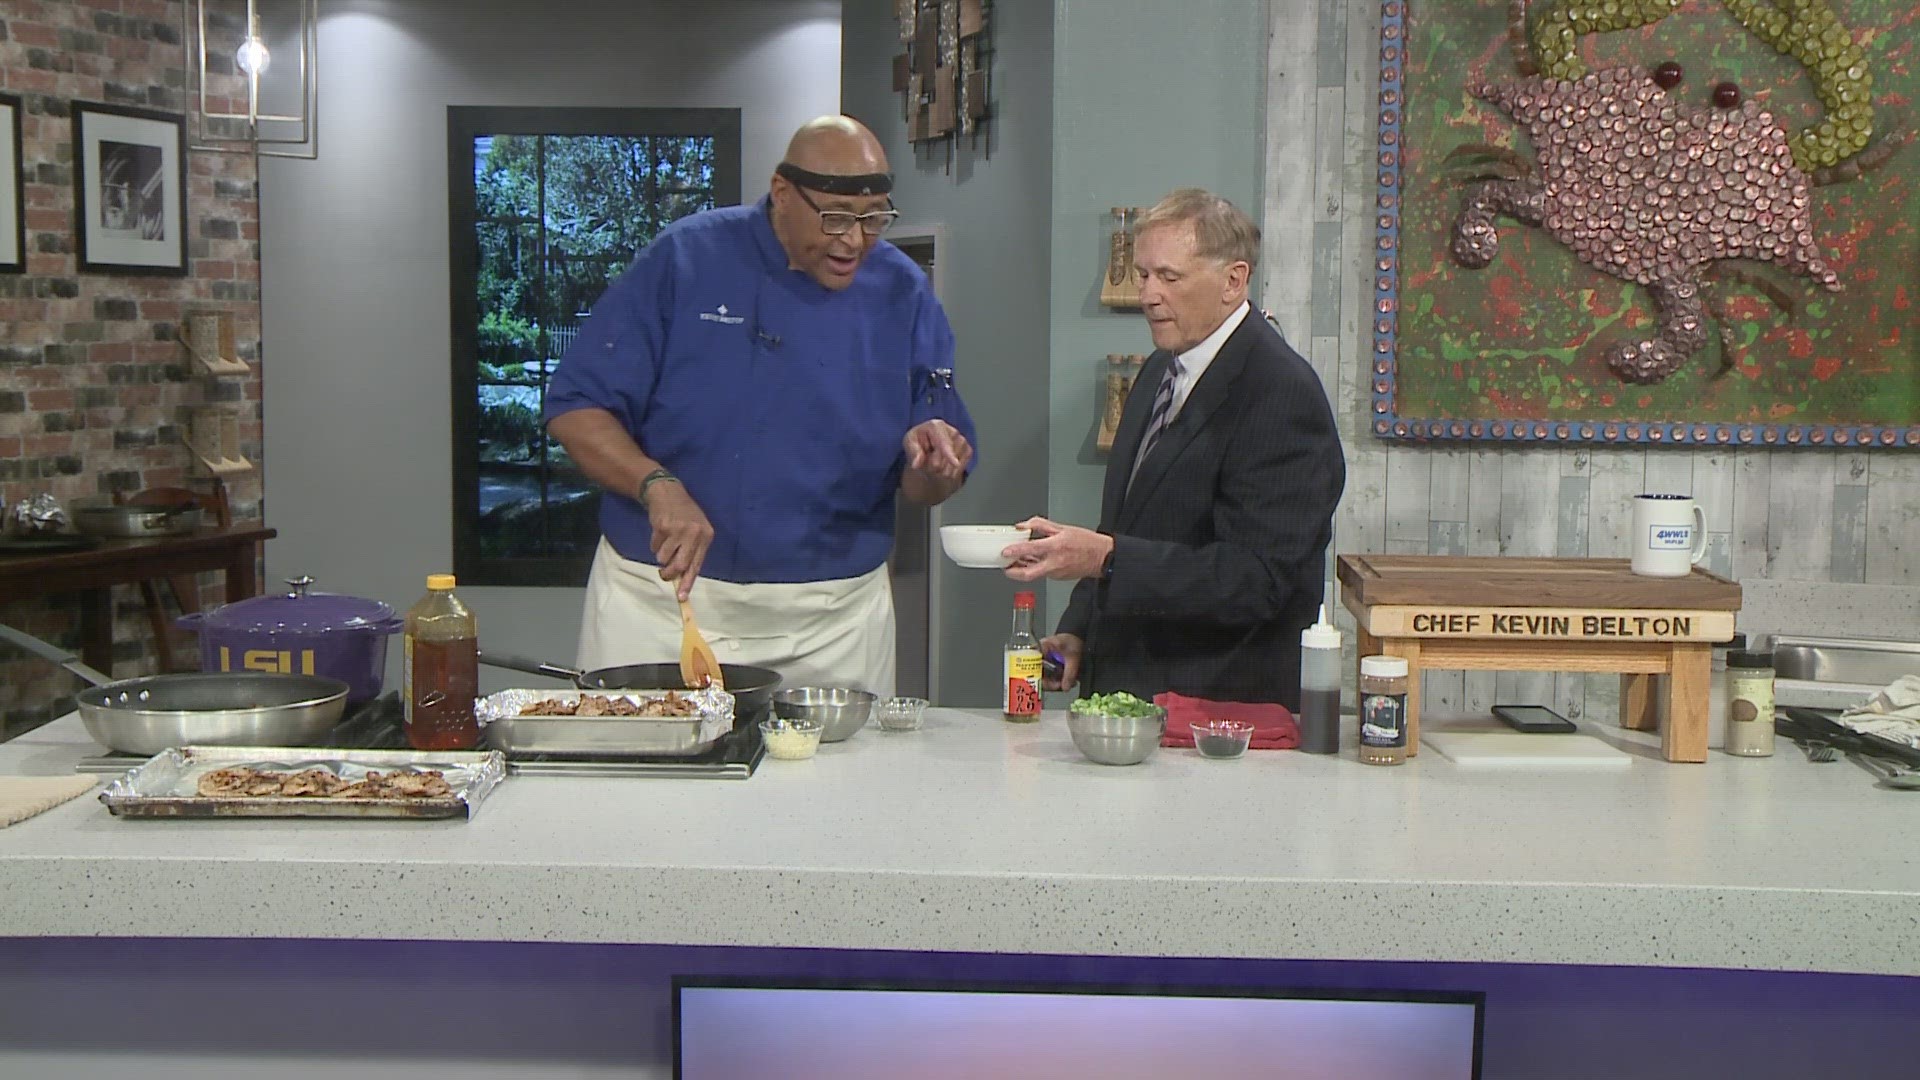 Chef Belton is in the WWL Louisiana Kitchen cooking up a delicious Honey Garlic Pork and rice dish.